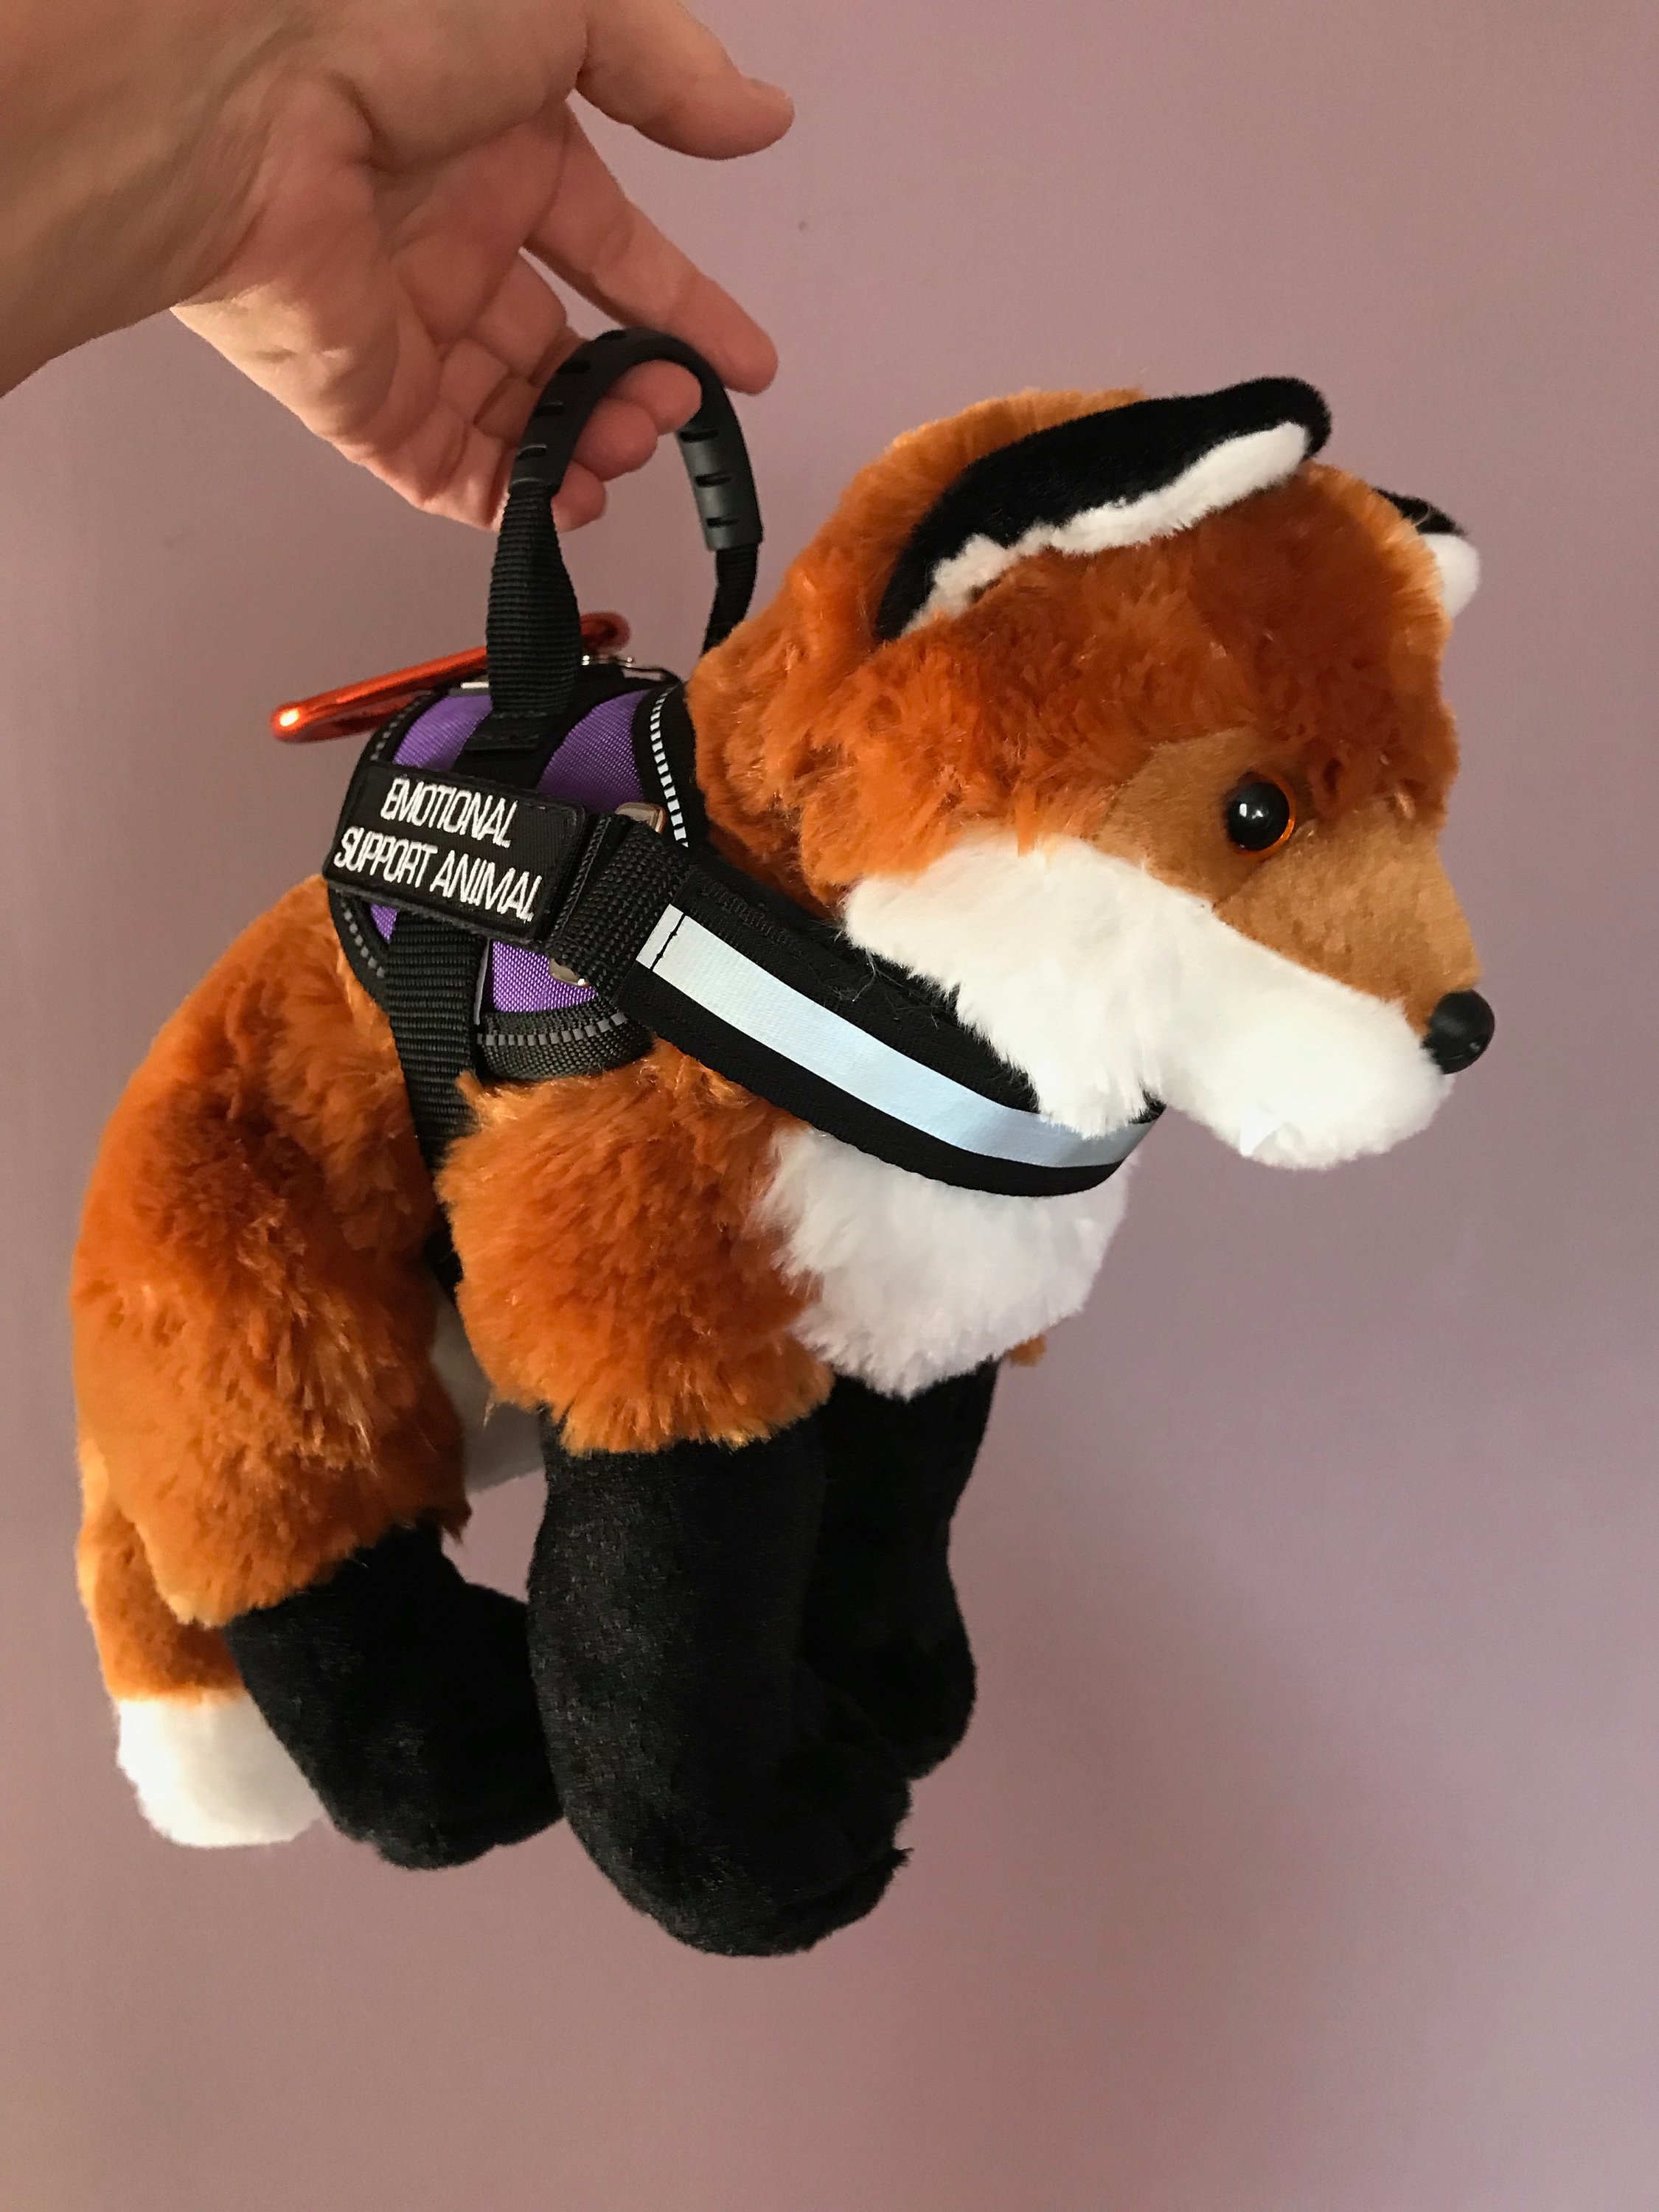 Emotional Support Red Fox Plush Stuffed Animal Personalized Gift Toy 